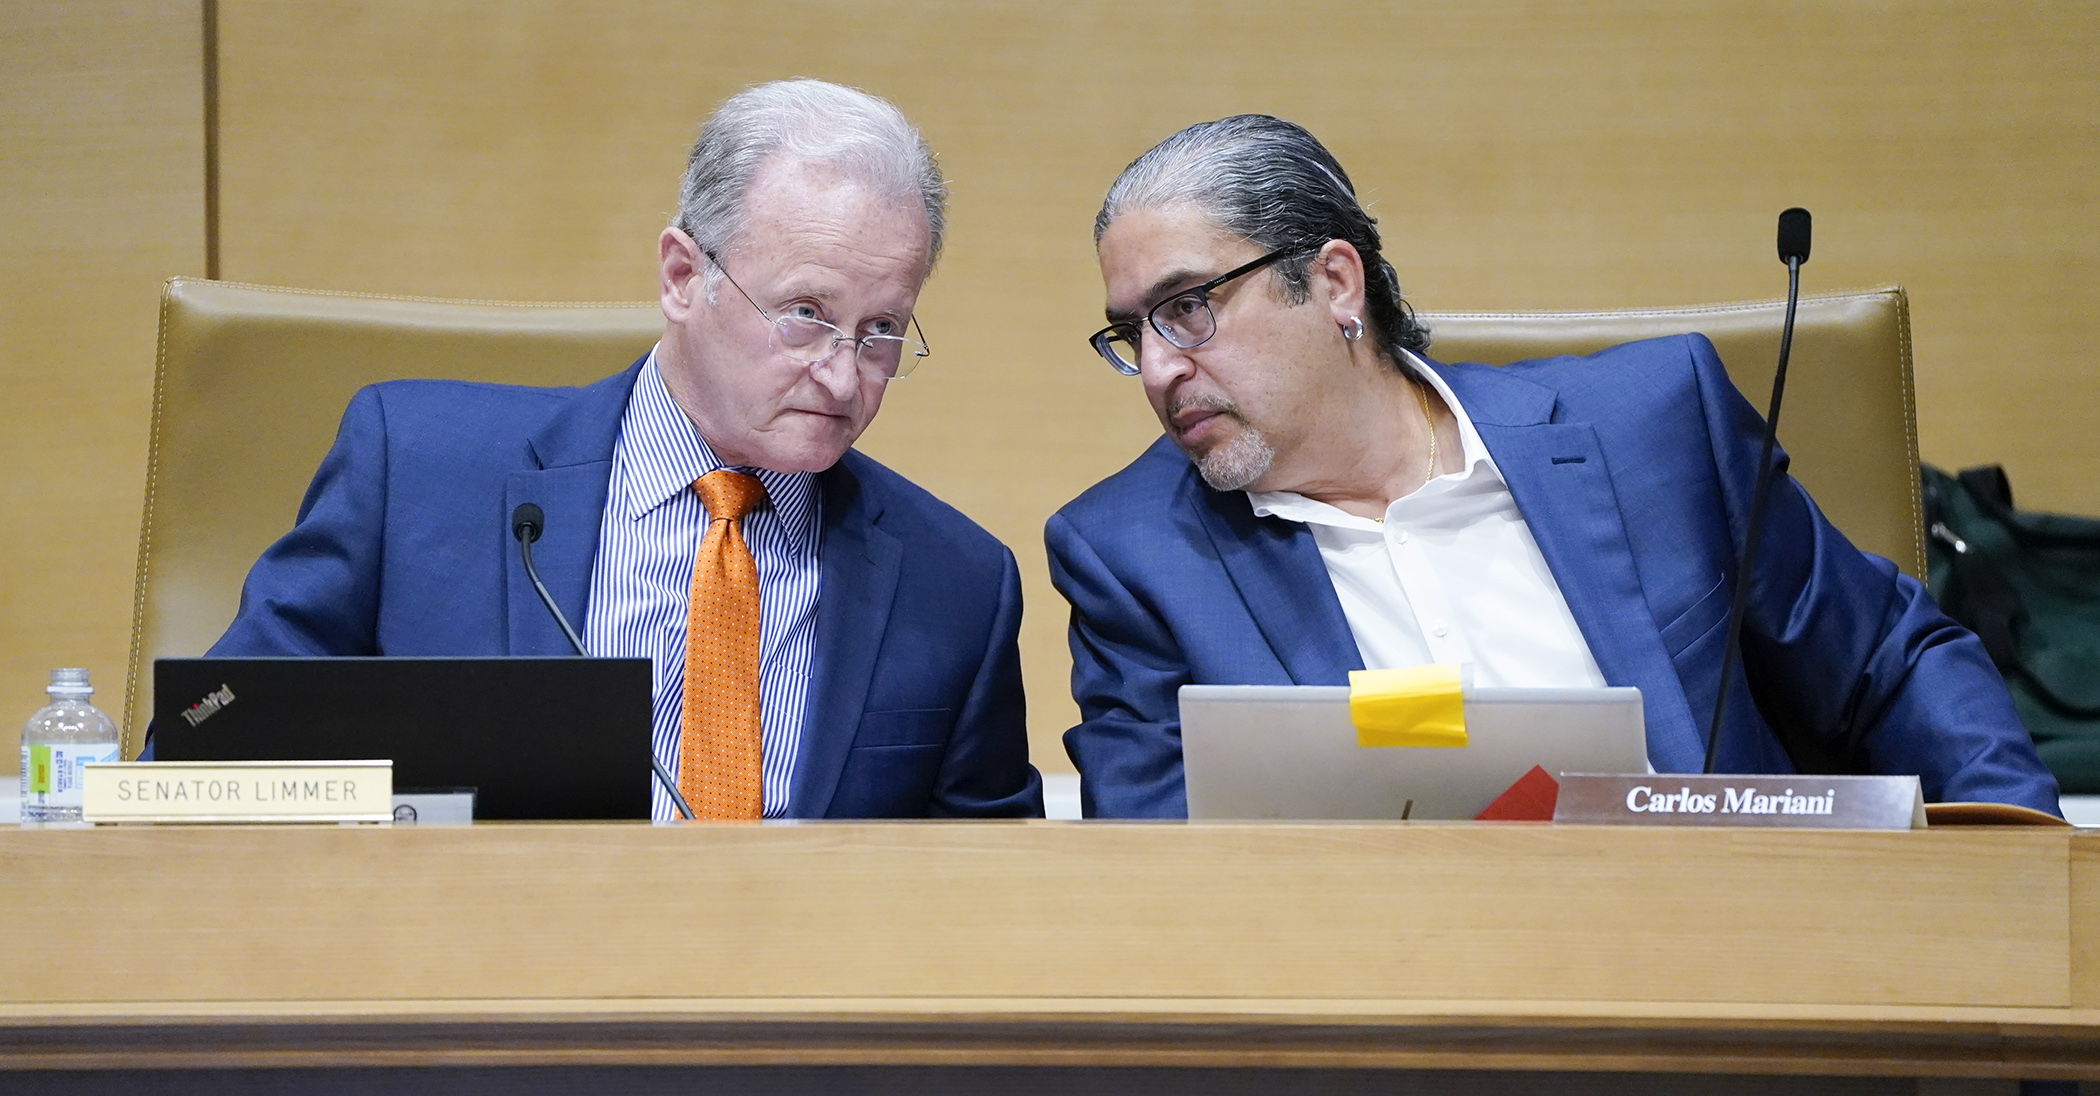 Sen. Warren Limmer, left, and Rep. Carlos Mariani confer during the first meeting of the omnibus public safety policy and supplemental appropriations conference committee May 10. (Photo by Paul Battaglia)